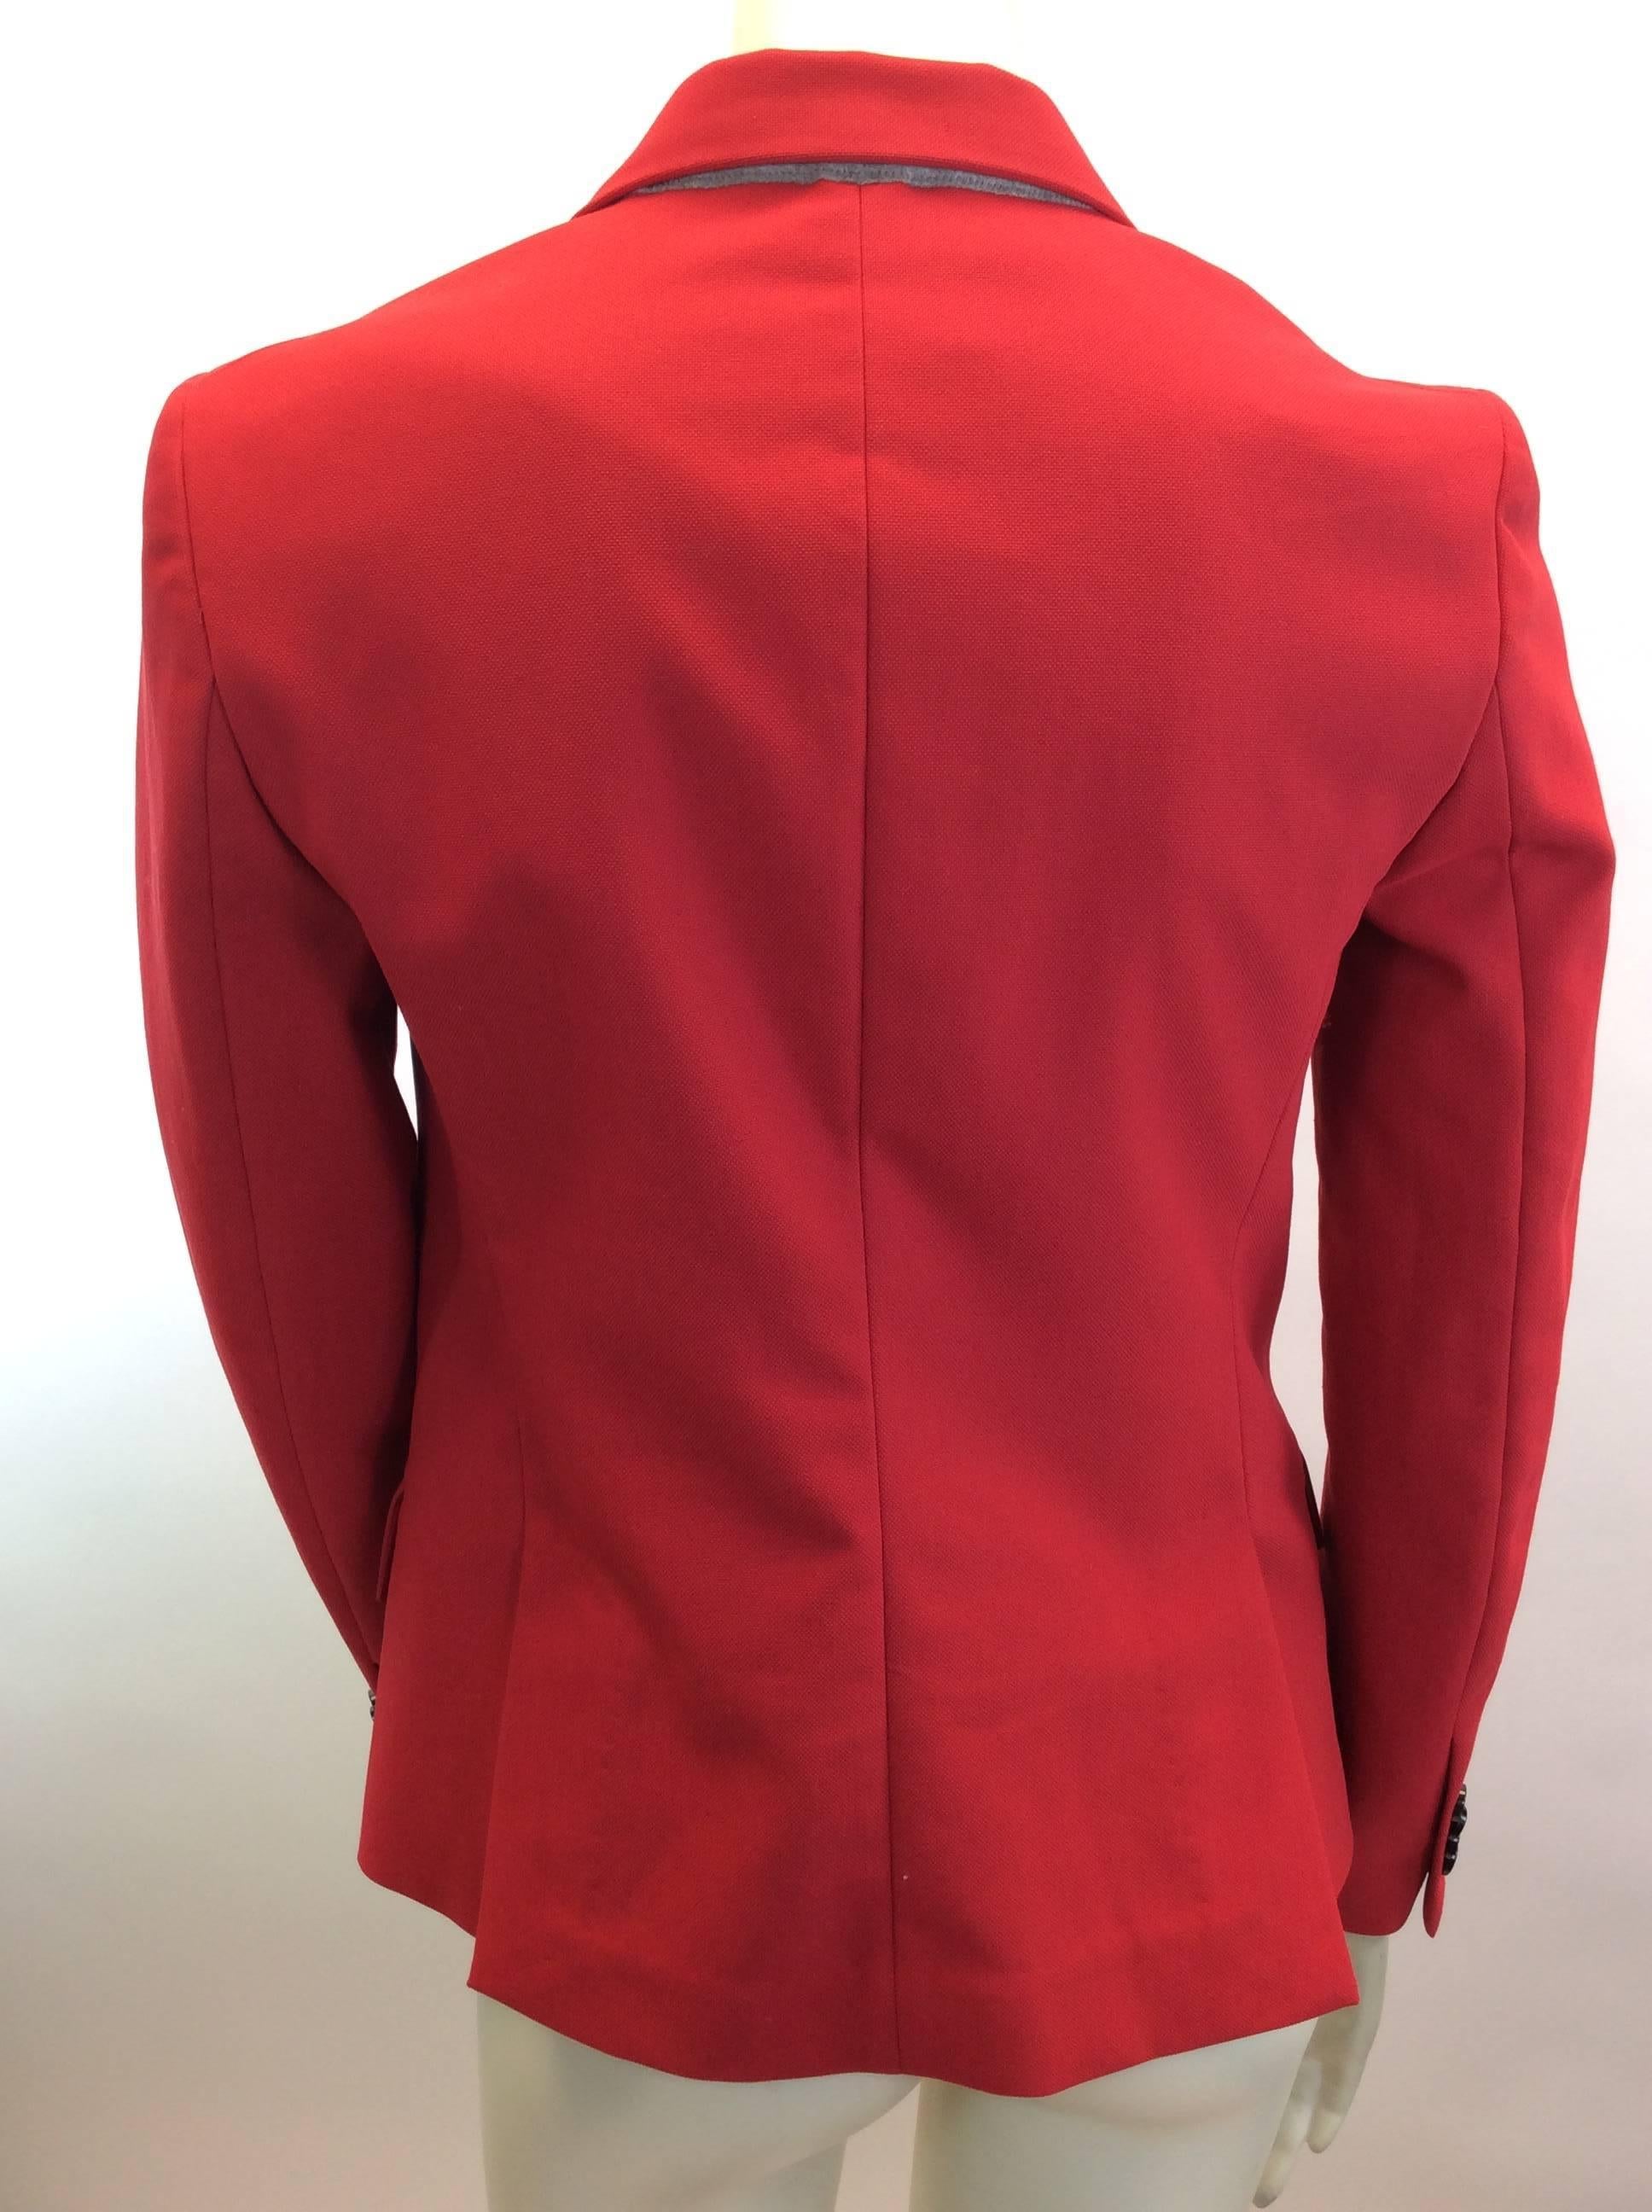 Phillip Lim Red Jacket In Excellent Condition For Sale In Narberth, PA